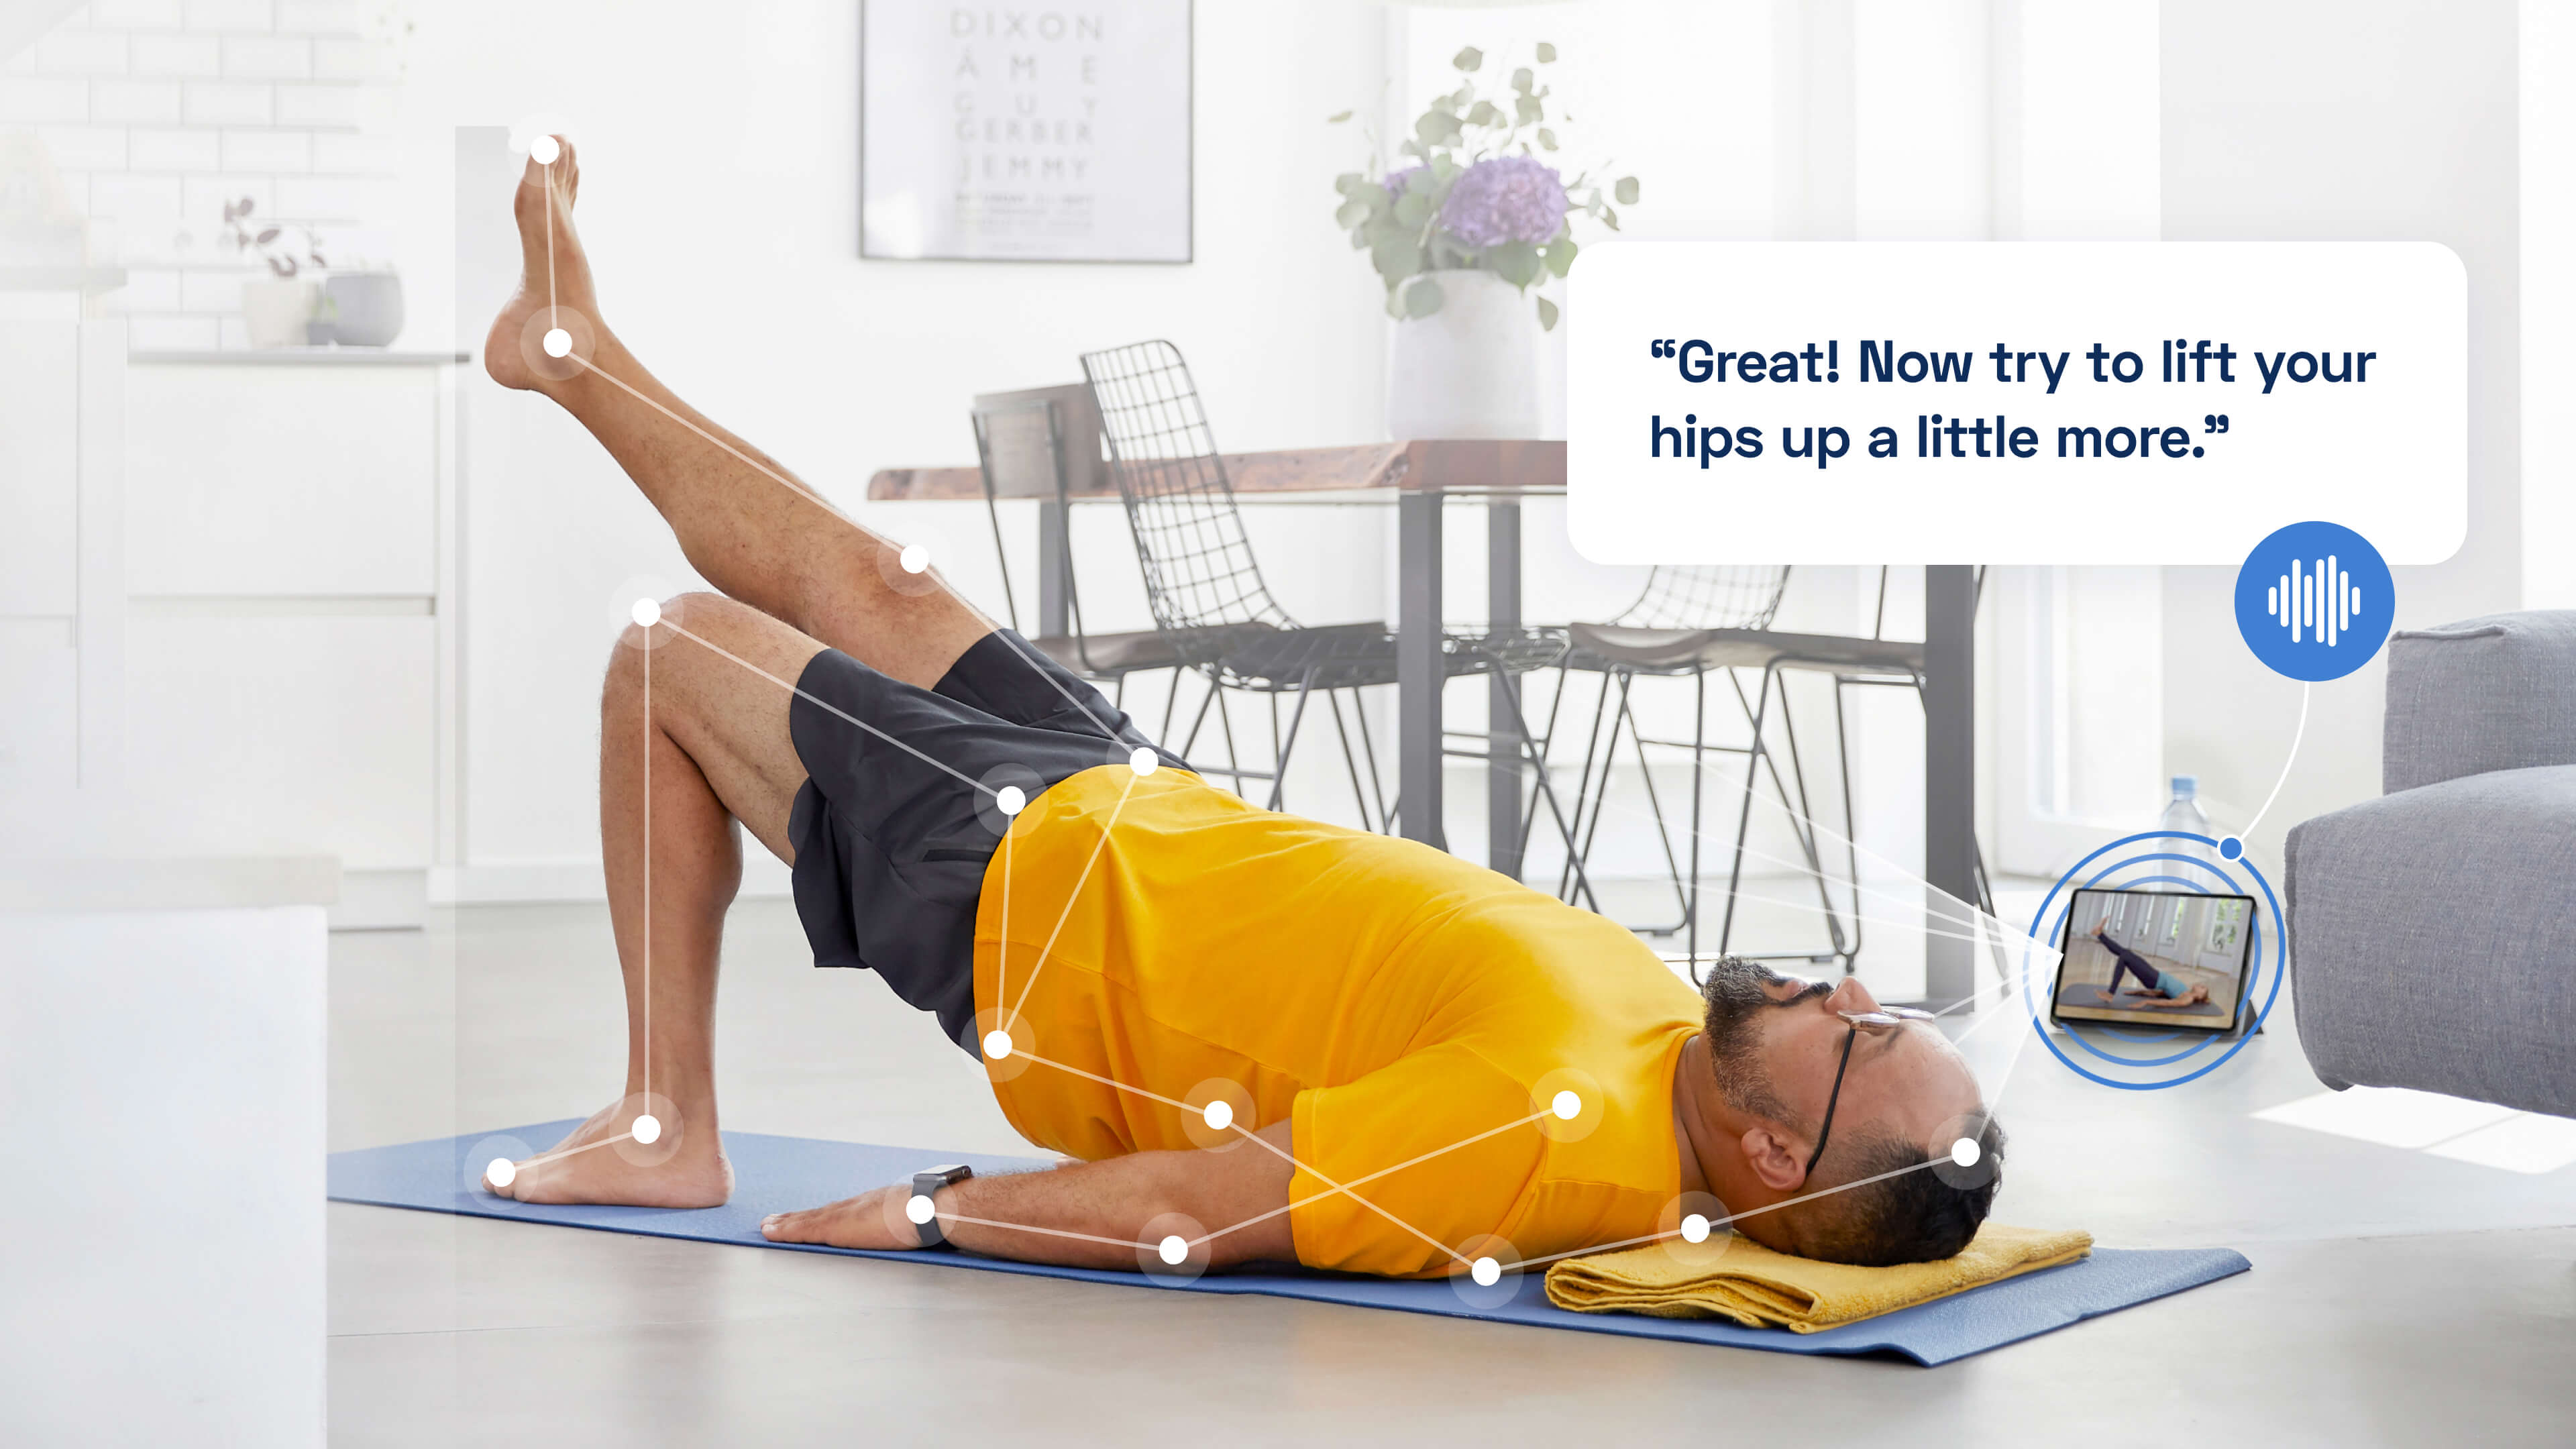 A man follows an exercise routine on a tablet while stretching on the floor.